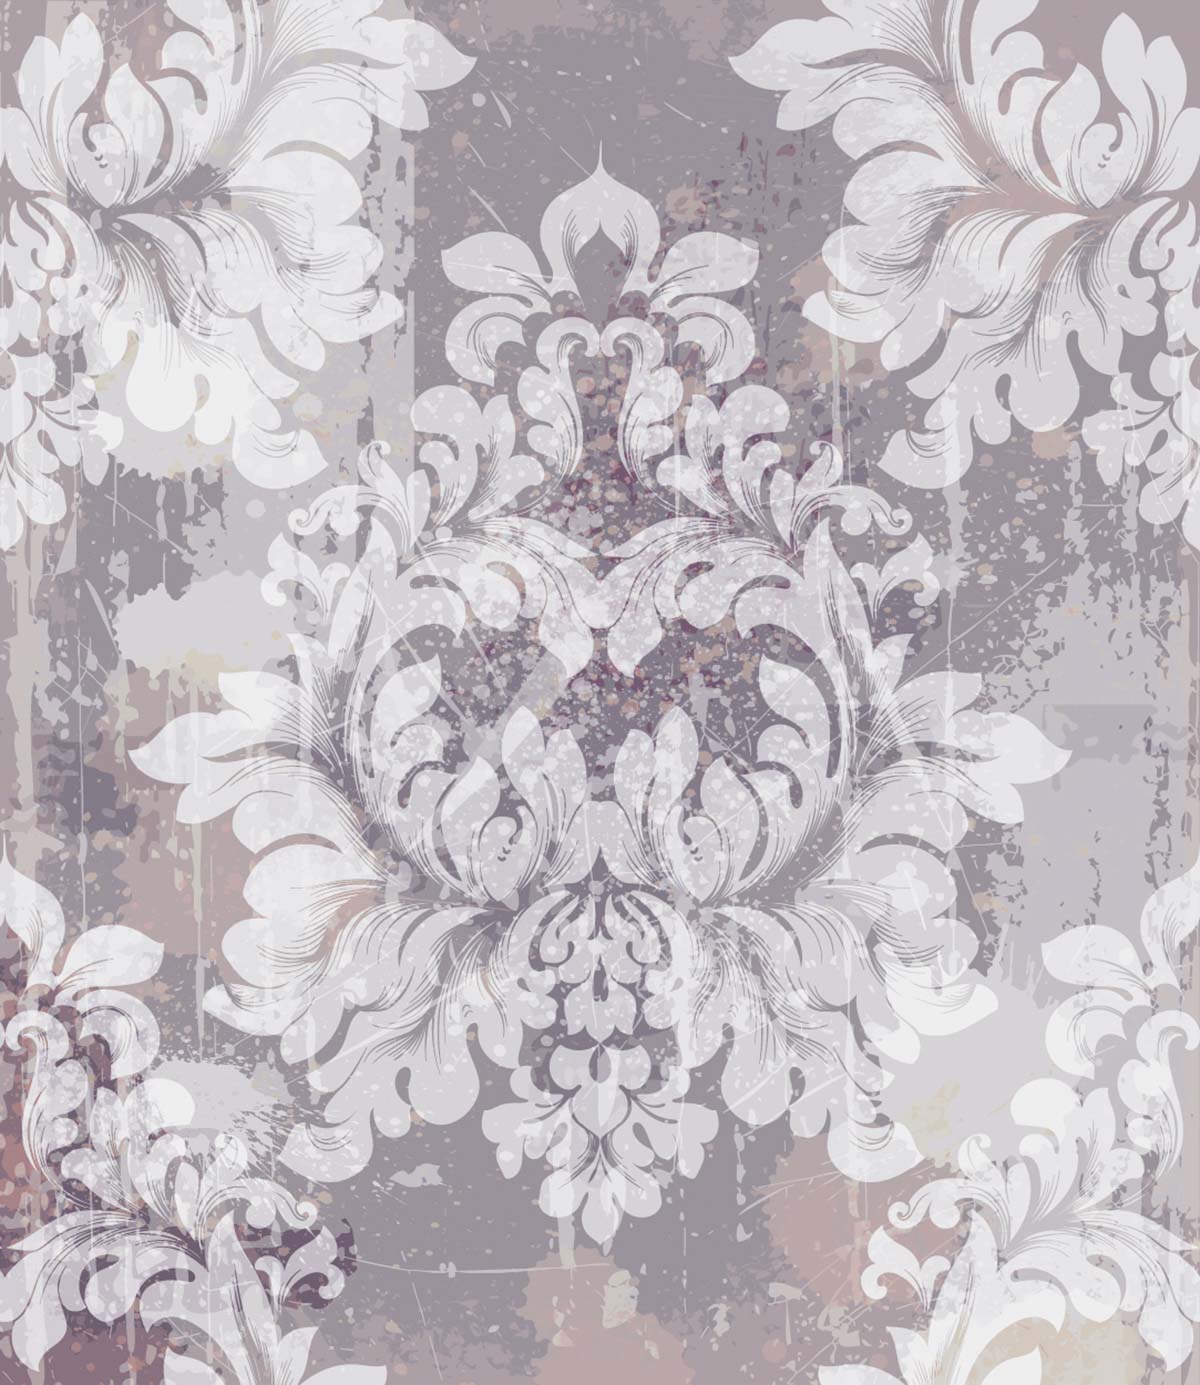 A wallpaper with white and pink designs